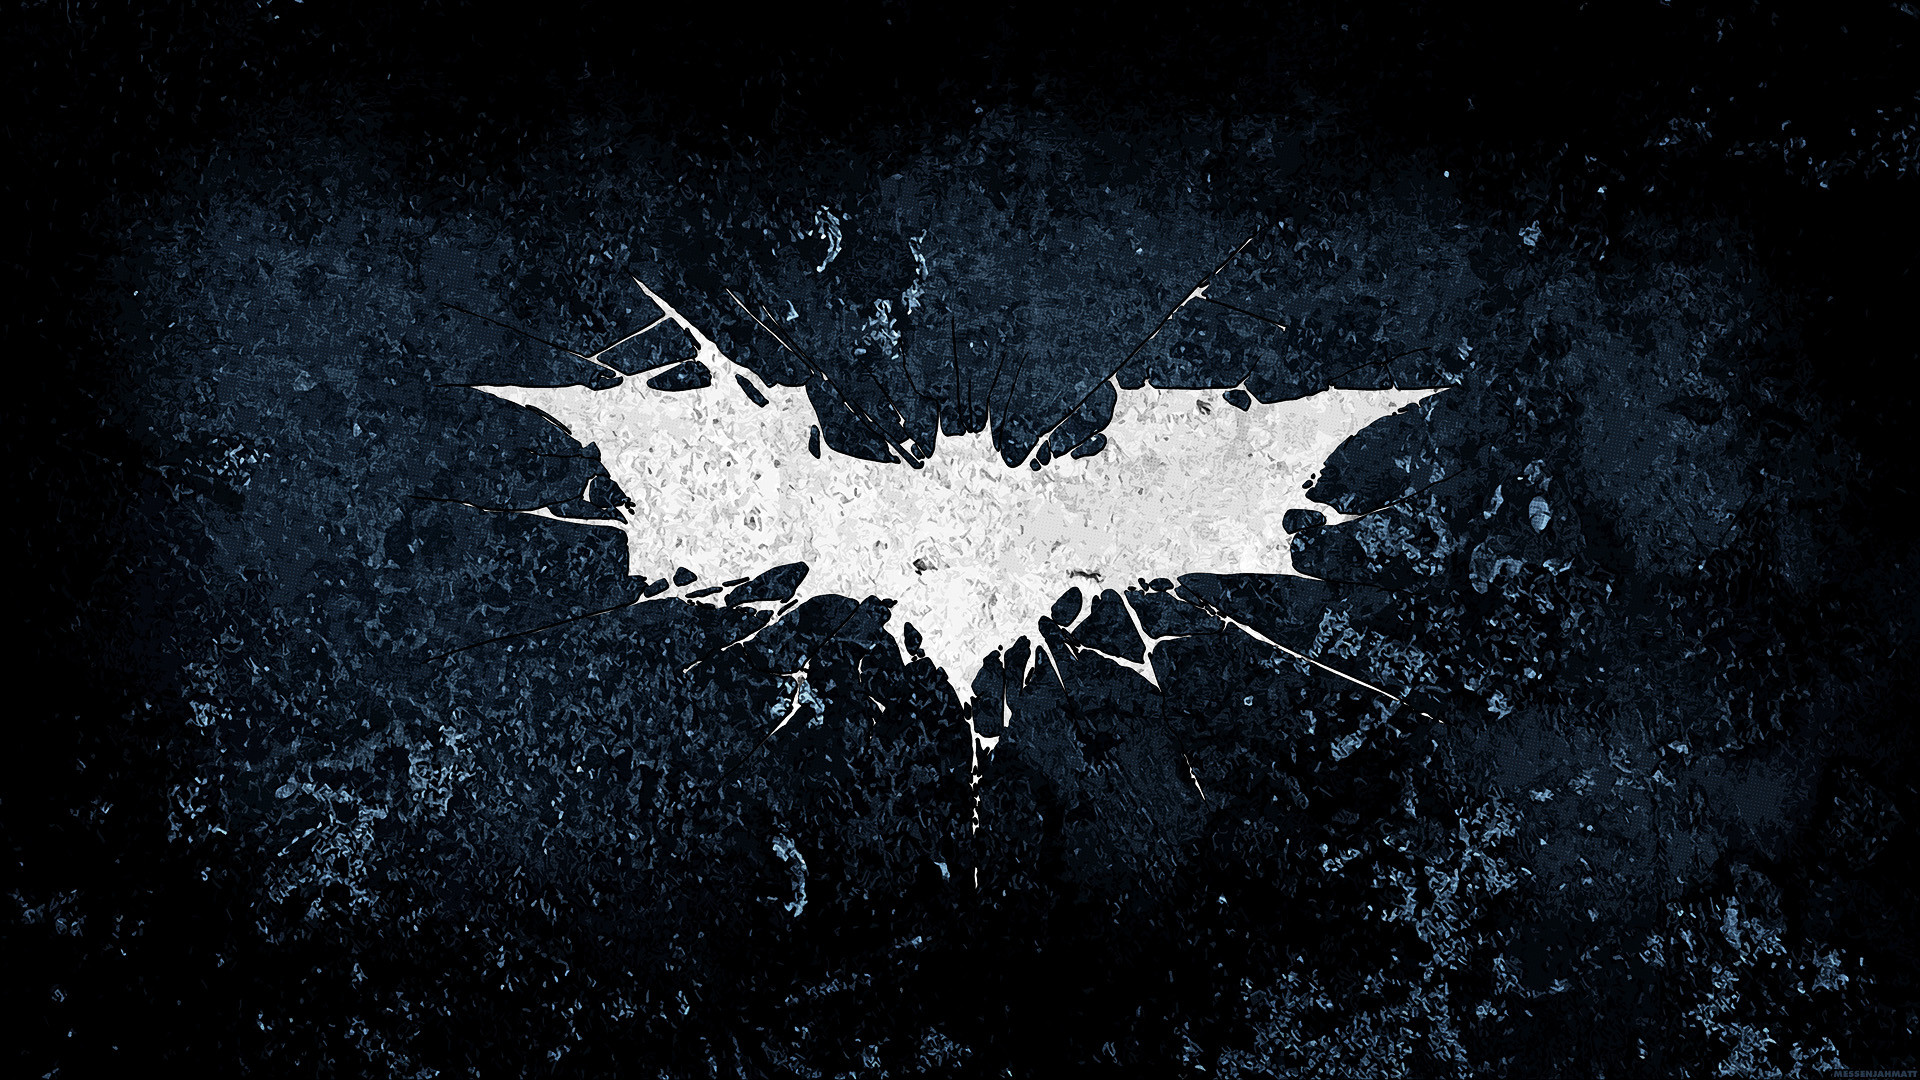 1920x1080 The Dark Knight Rises Wallpapers HD. Image Source Â·  the_dark_knight_rises_hd_wallpapers_desktop_backgrounds_latest_2012_batman_symbol_wallpapers